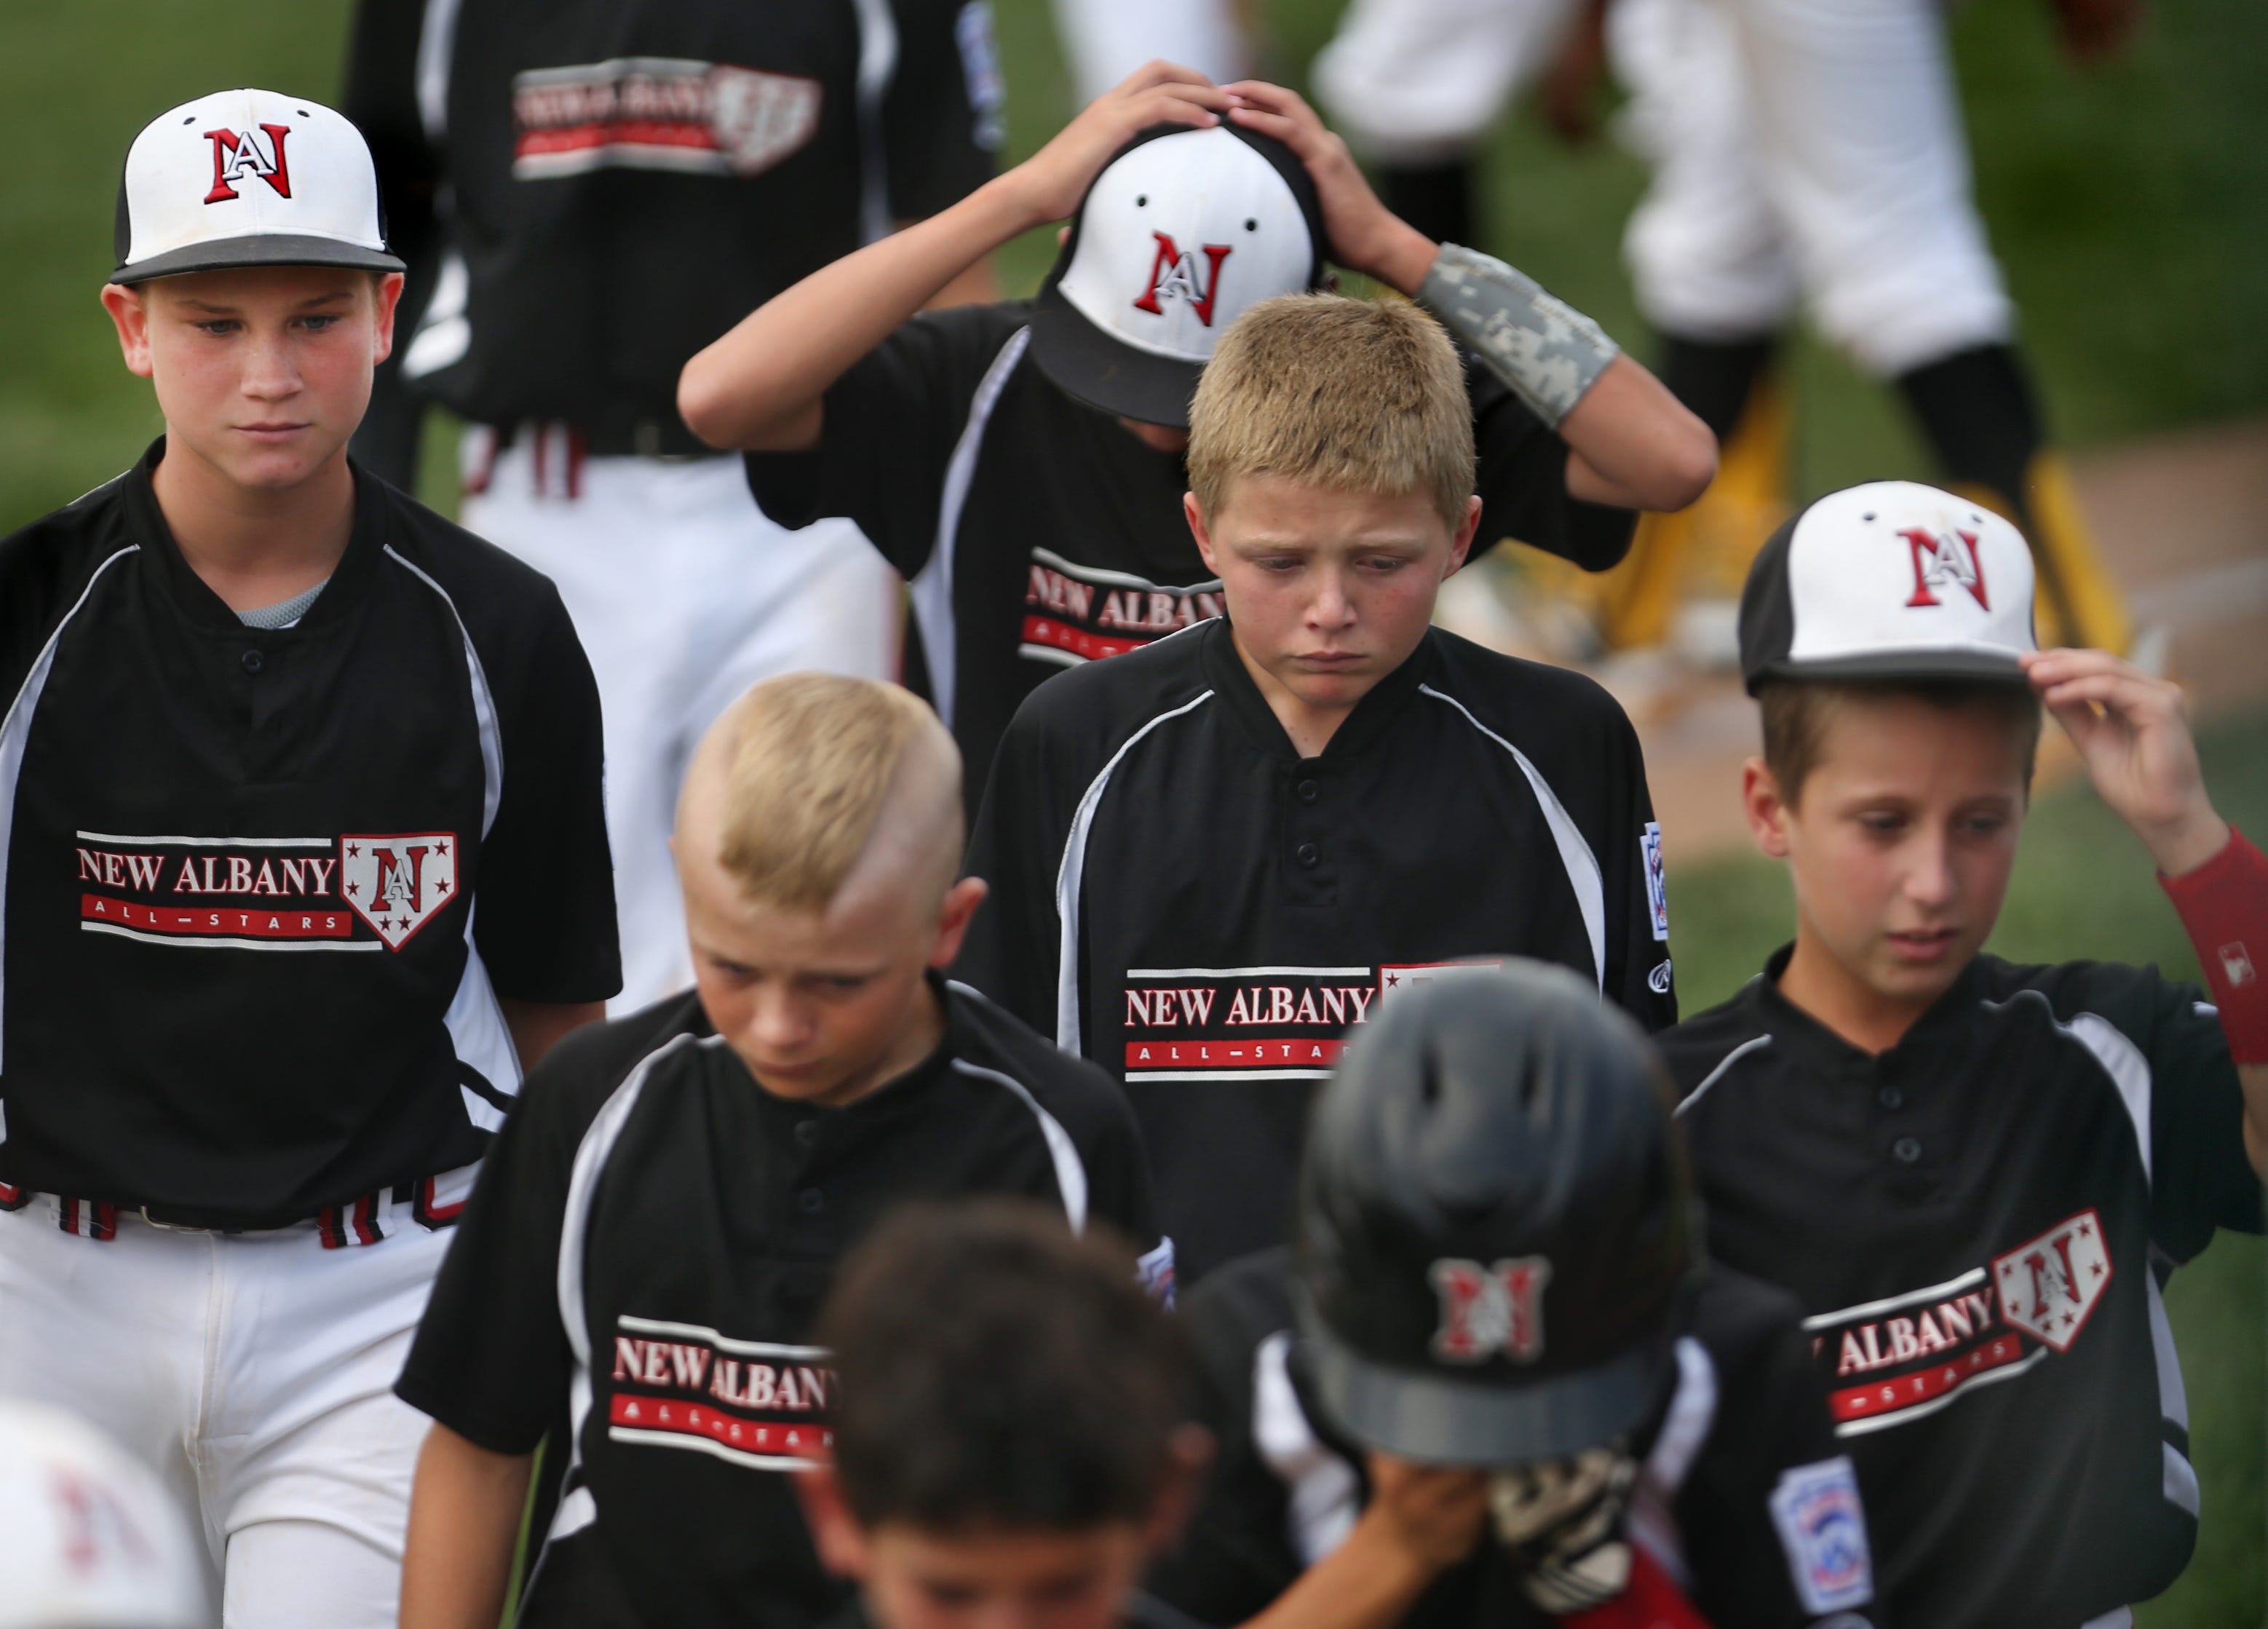 New Albany takes hard fall in Little League World Series